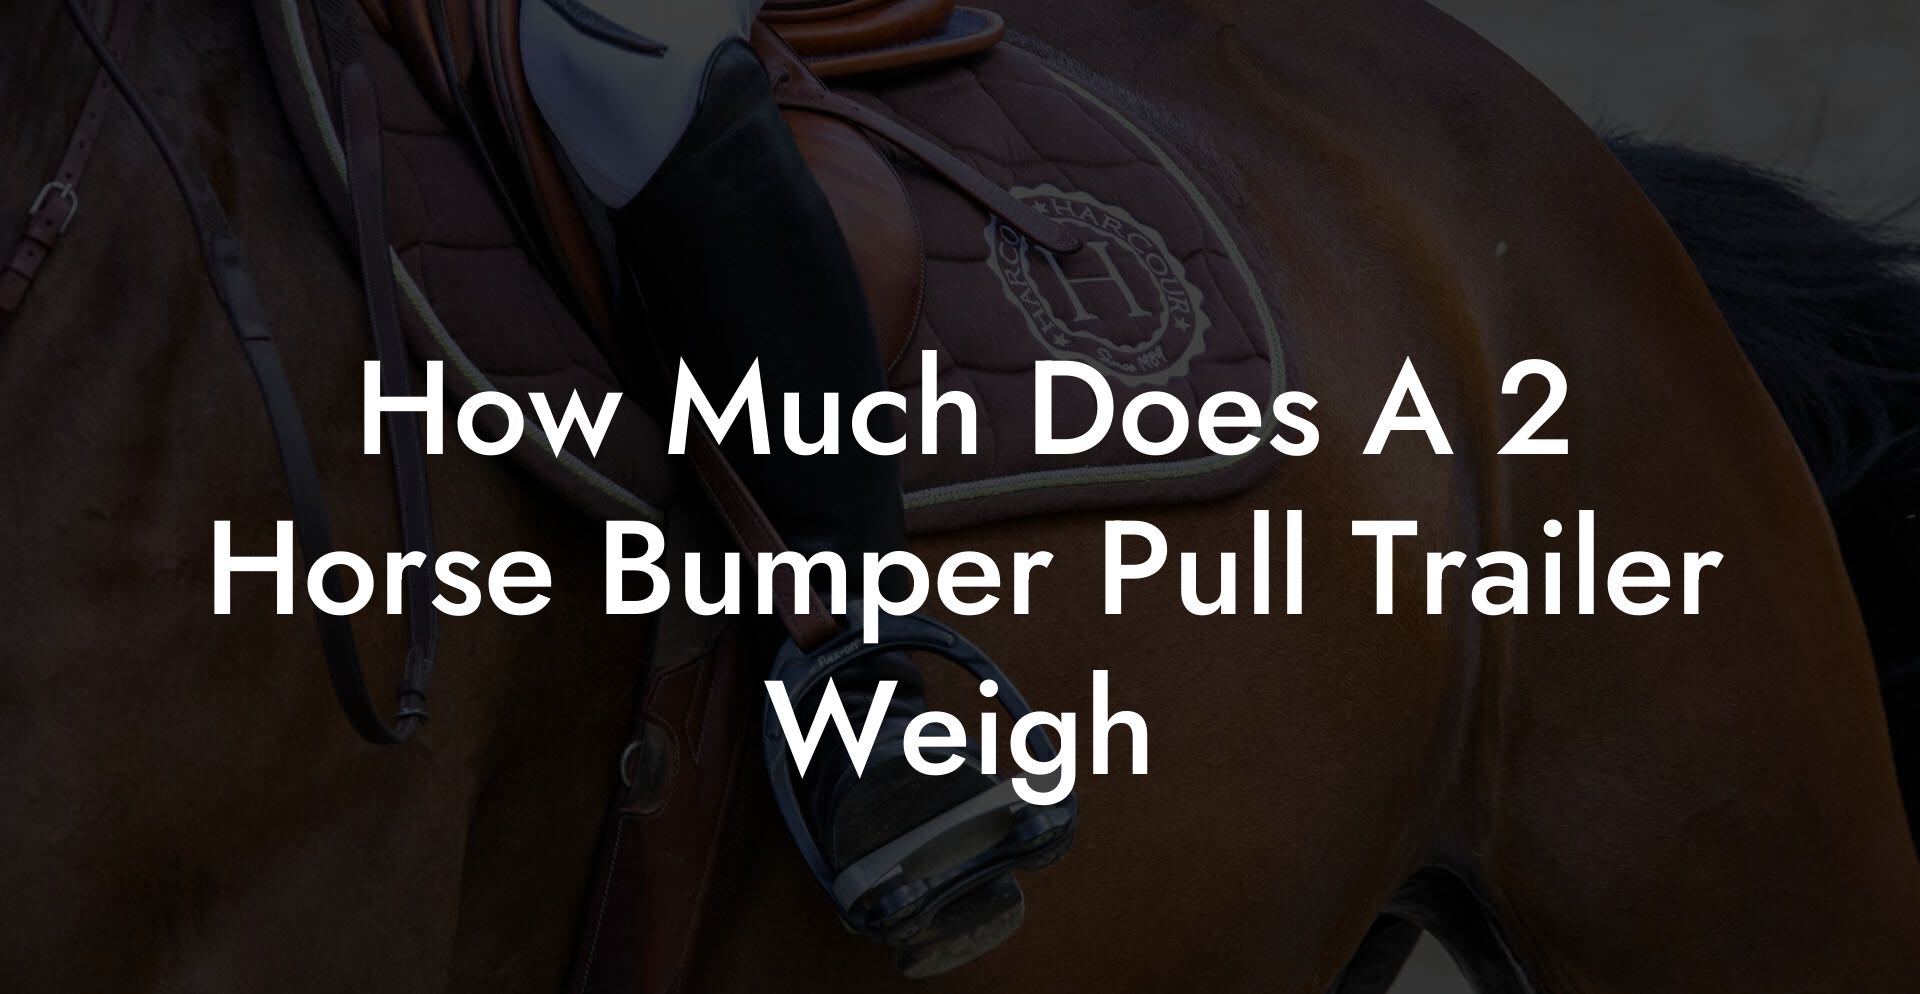 How Much Does A 2 Horse Bumper Pull Trailer Weigh